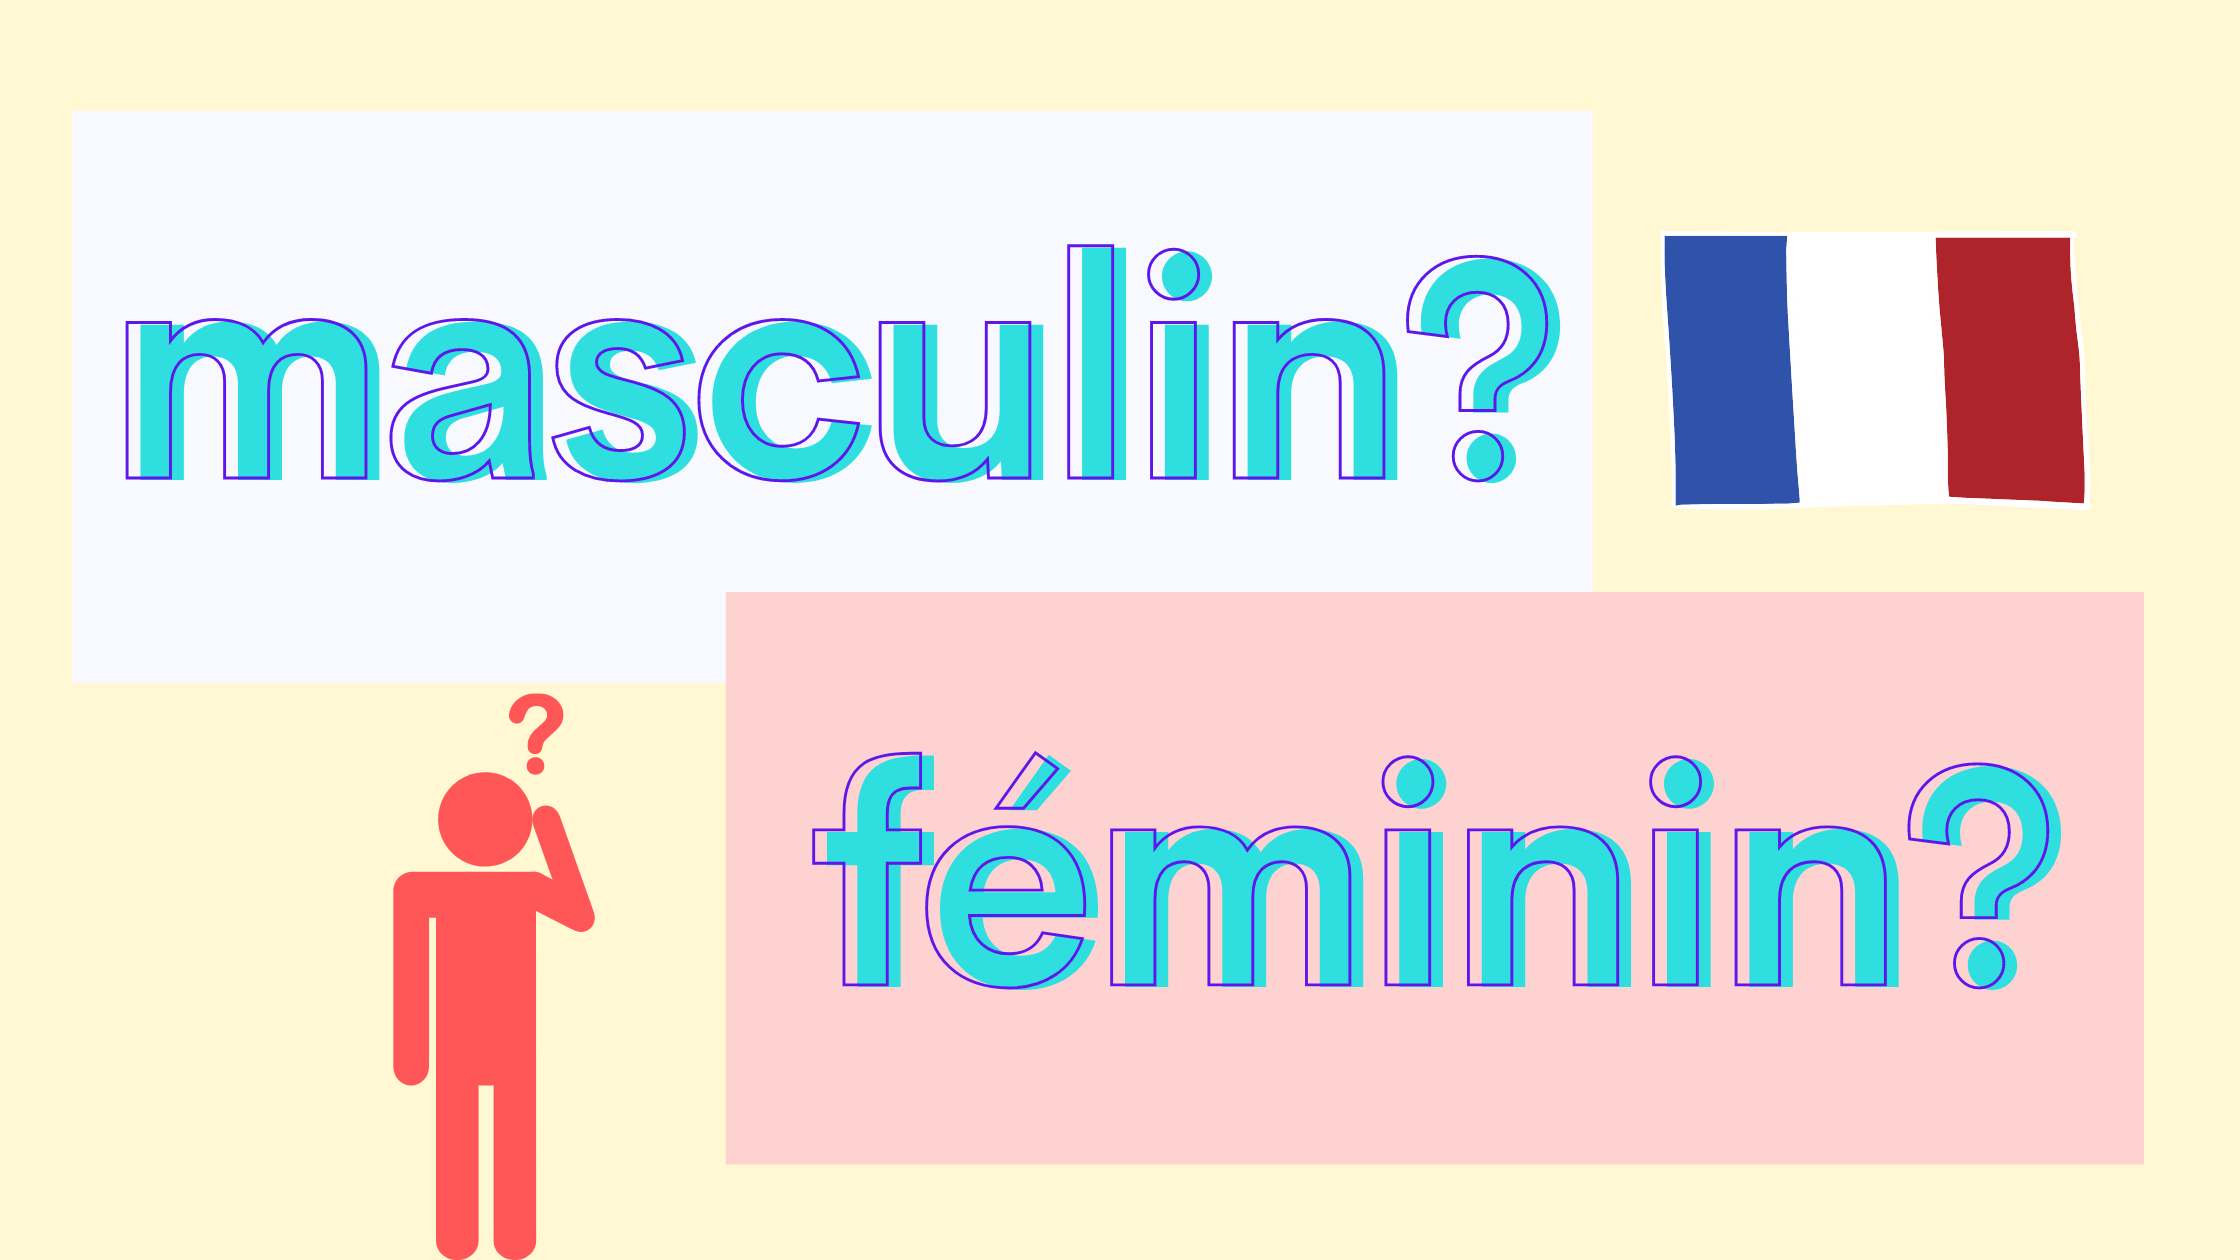 feminine or masculine in french